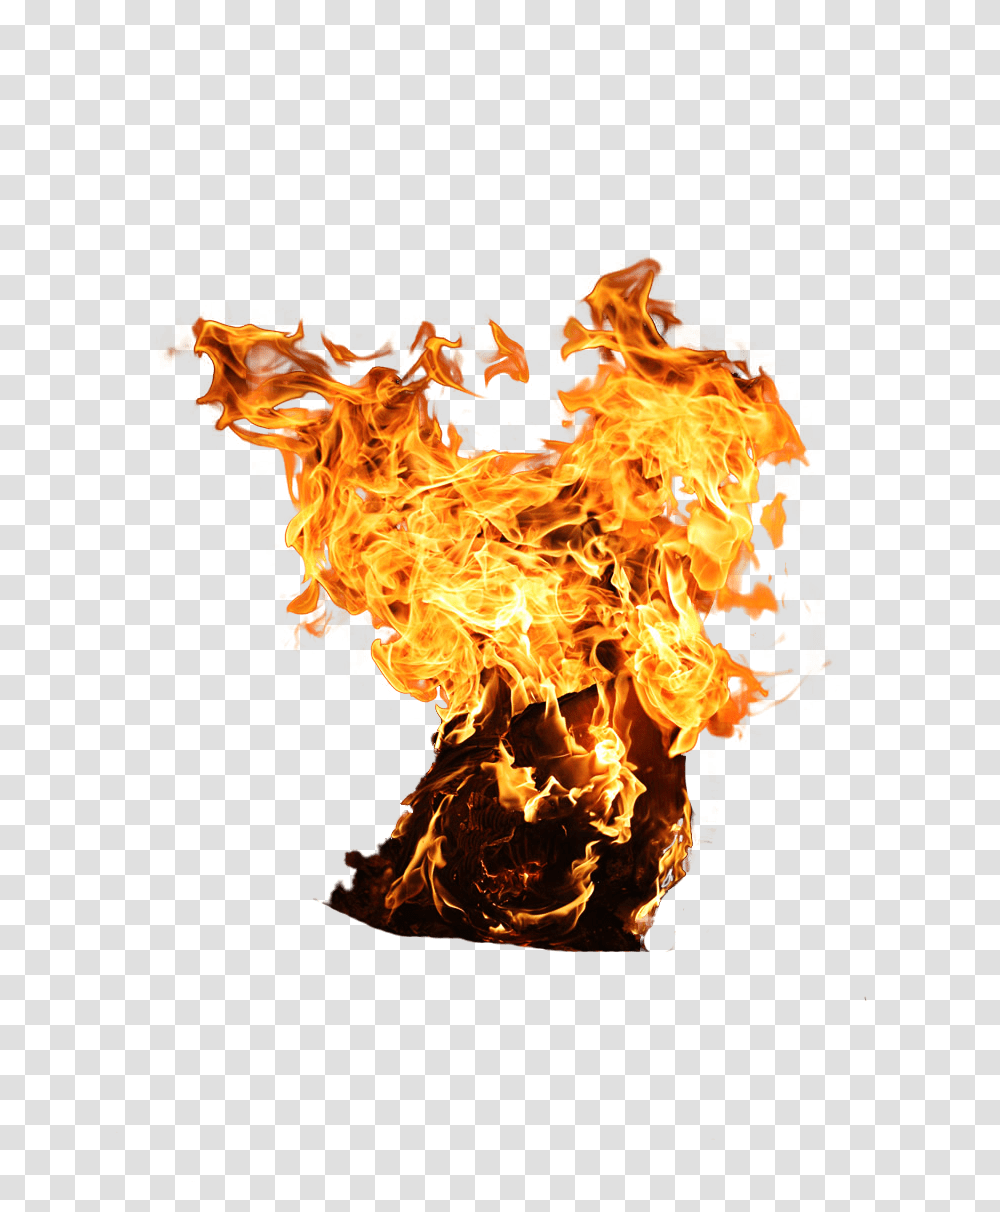 Fire Images Background Play Fire, Flame, Bonfire Transparent Png